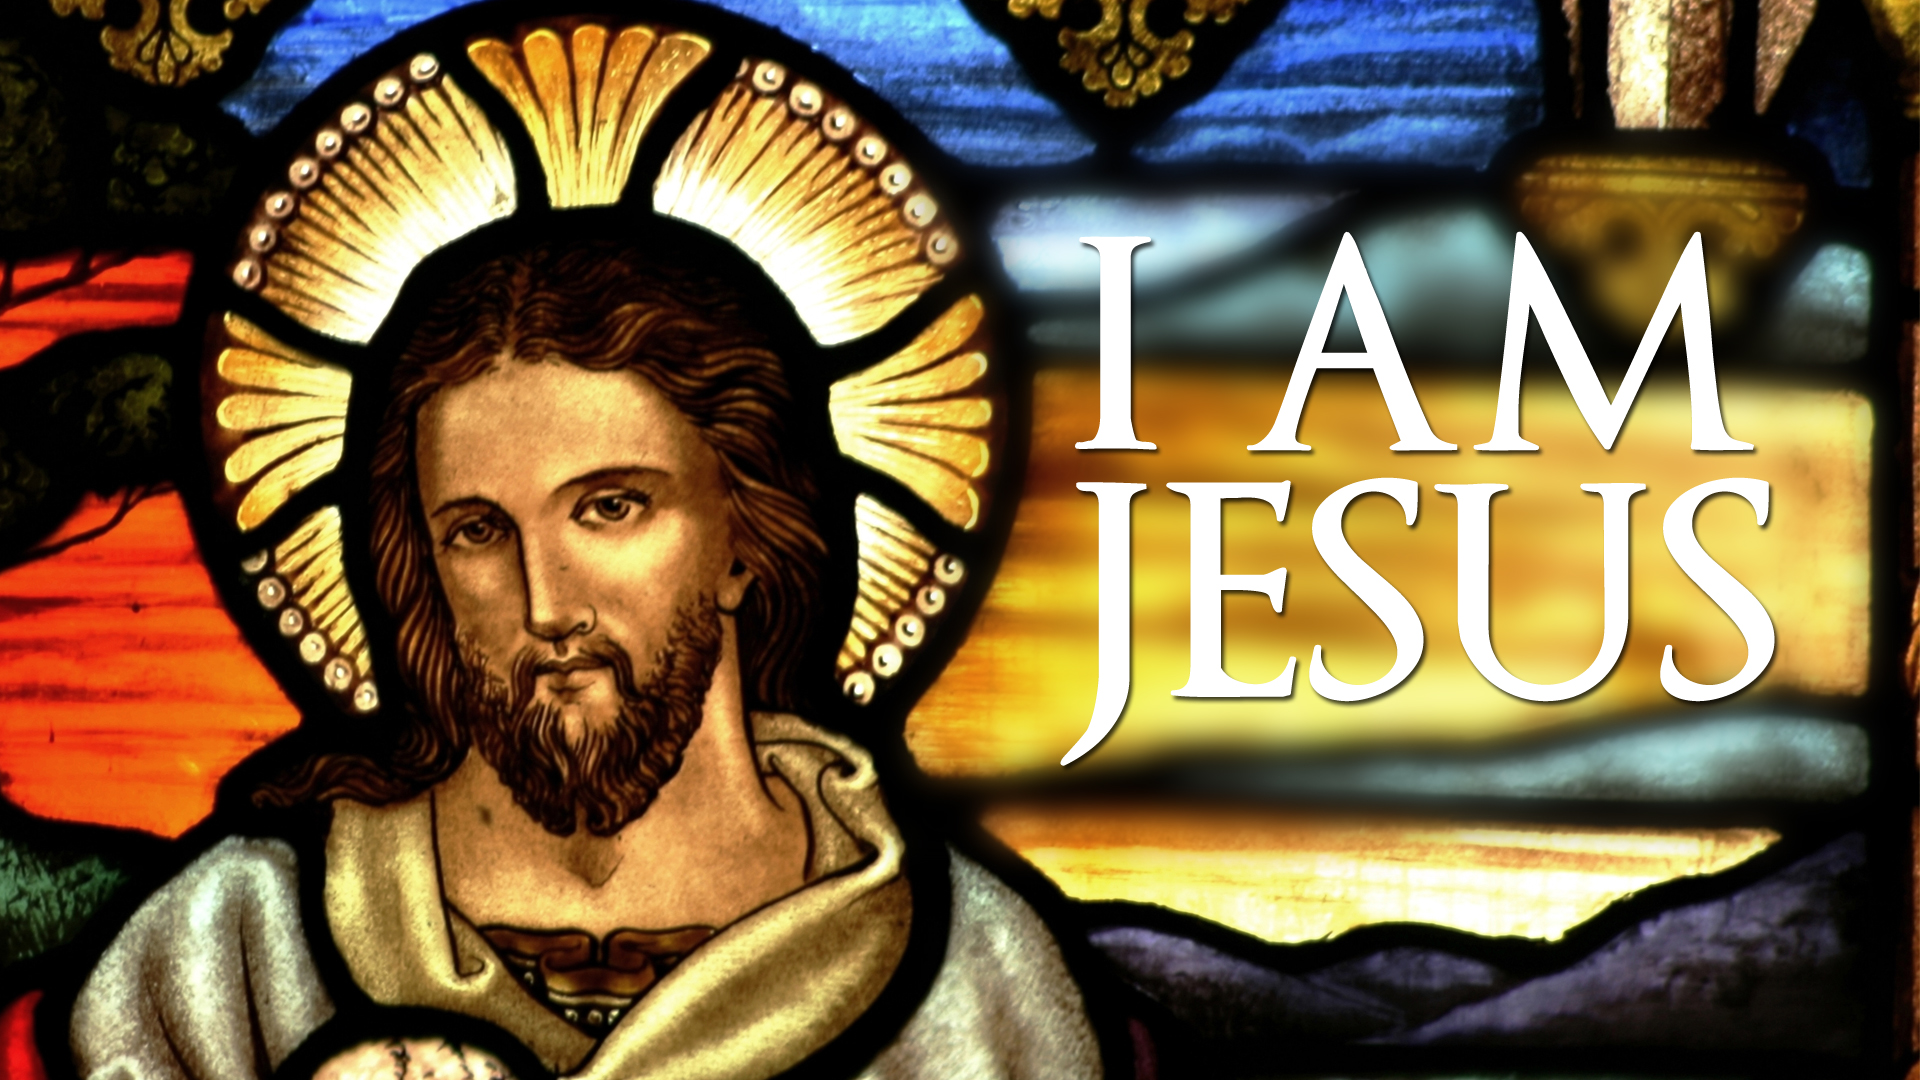 i am not and have never said that i am jesus christ.